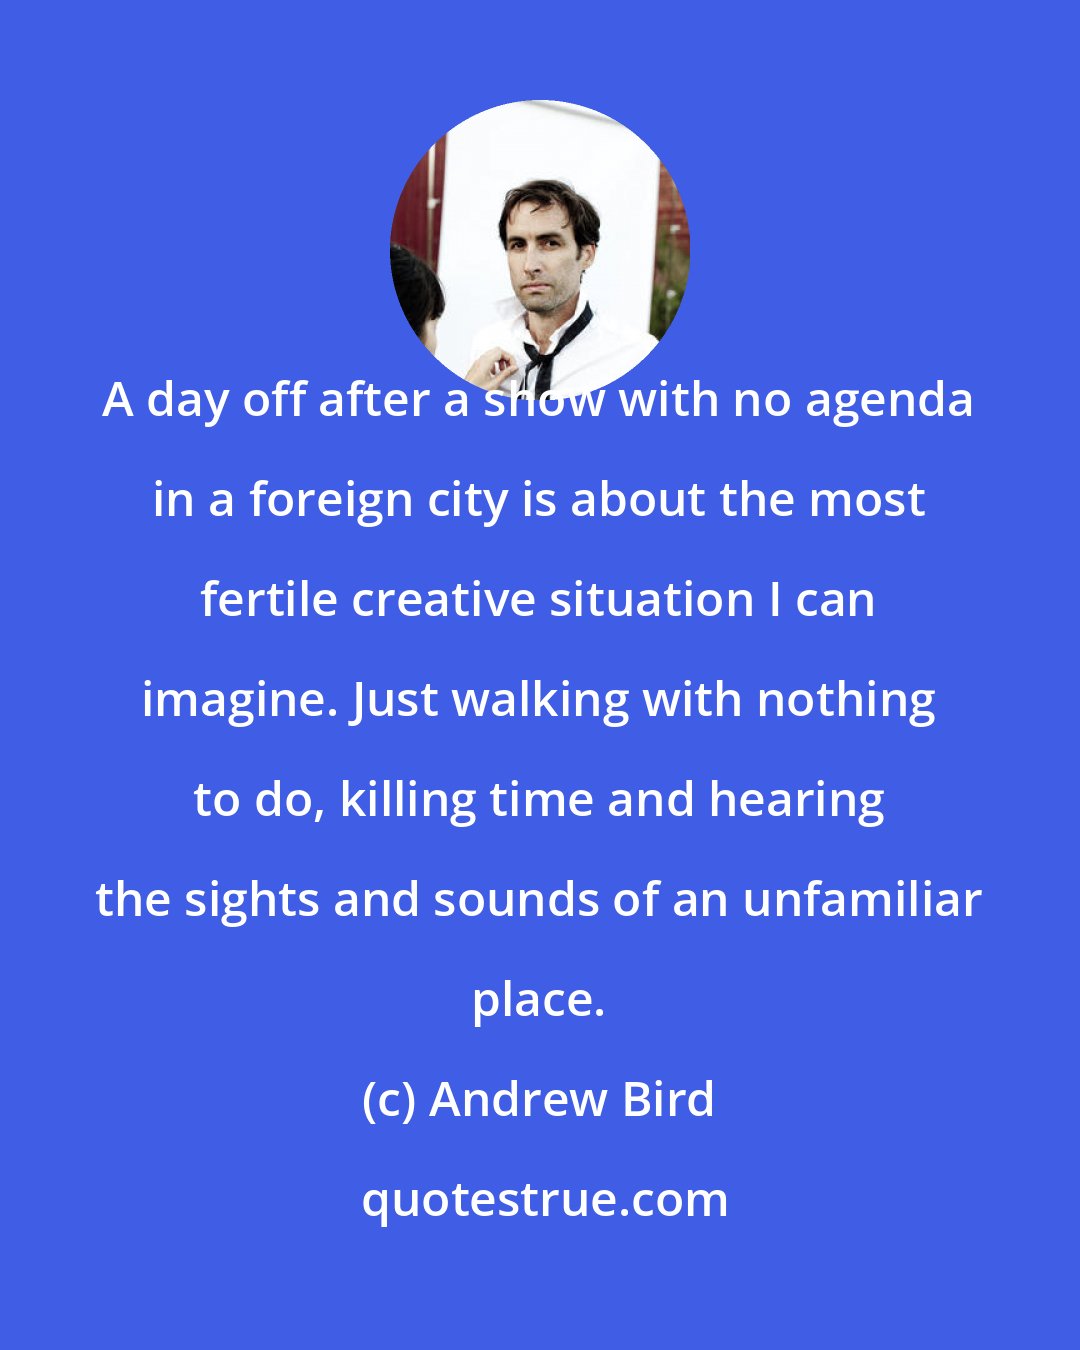 Andrew Bird: A day off after a show with no agenda in a foreign city is about the most fertile creative situation I can imagine. Just walking with nothing to do, killing time and hearing the sights and sounds of an unfamiliar place.